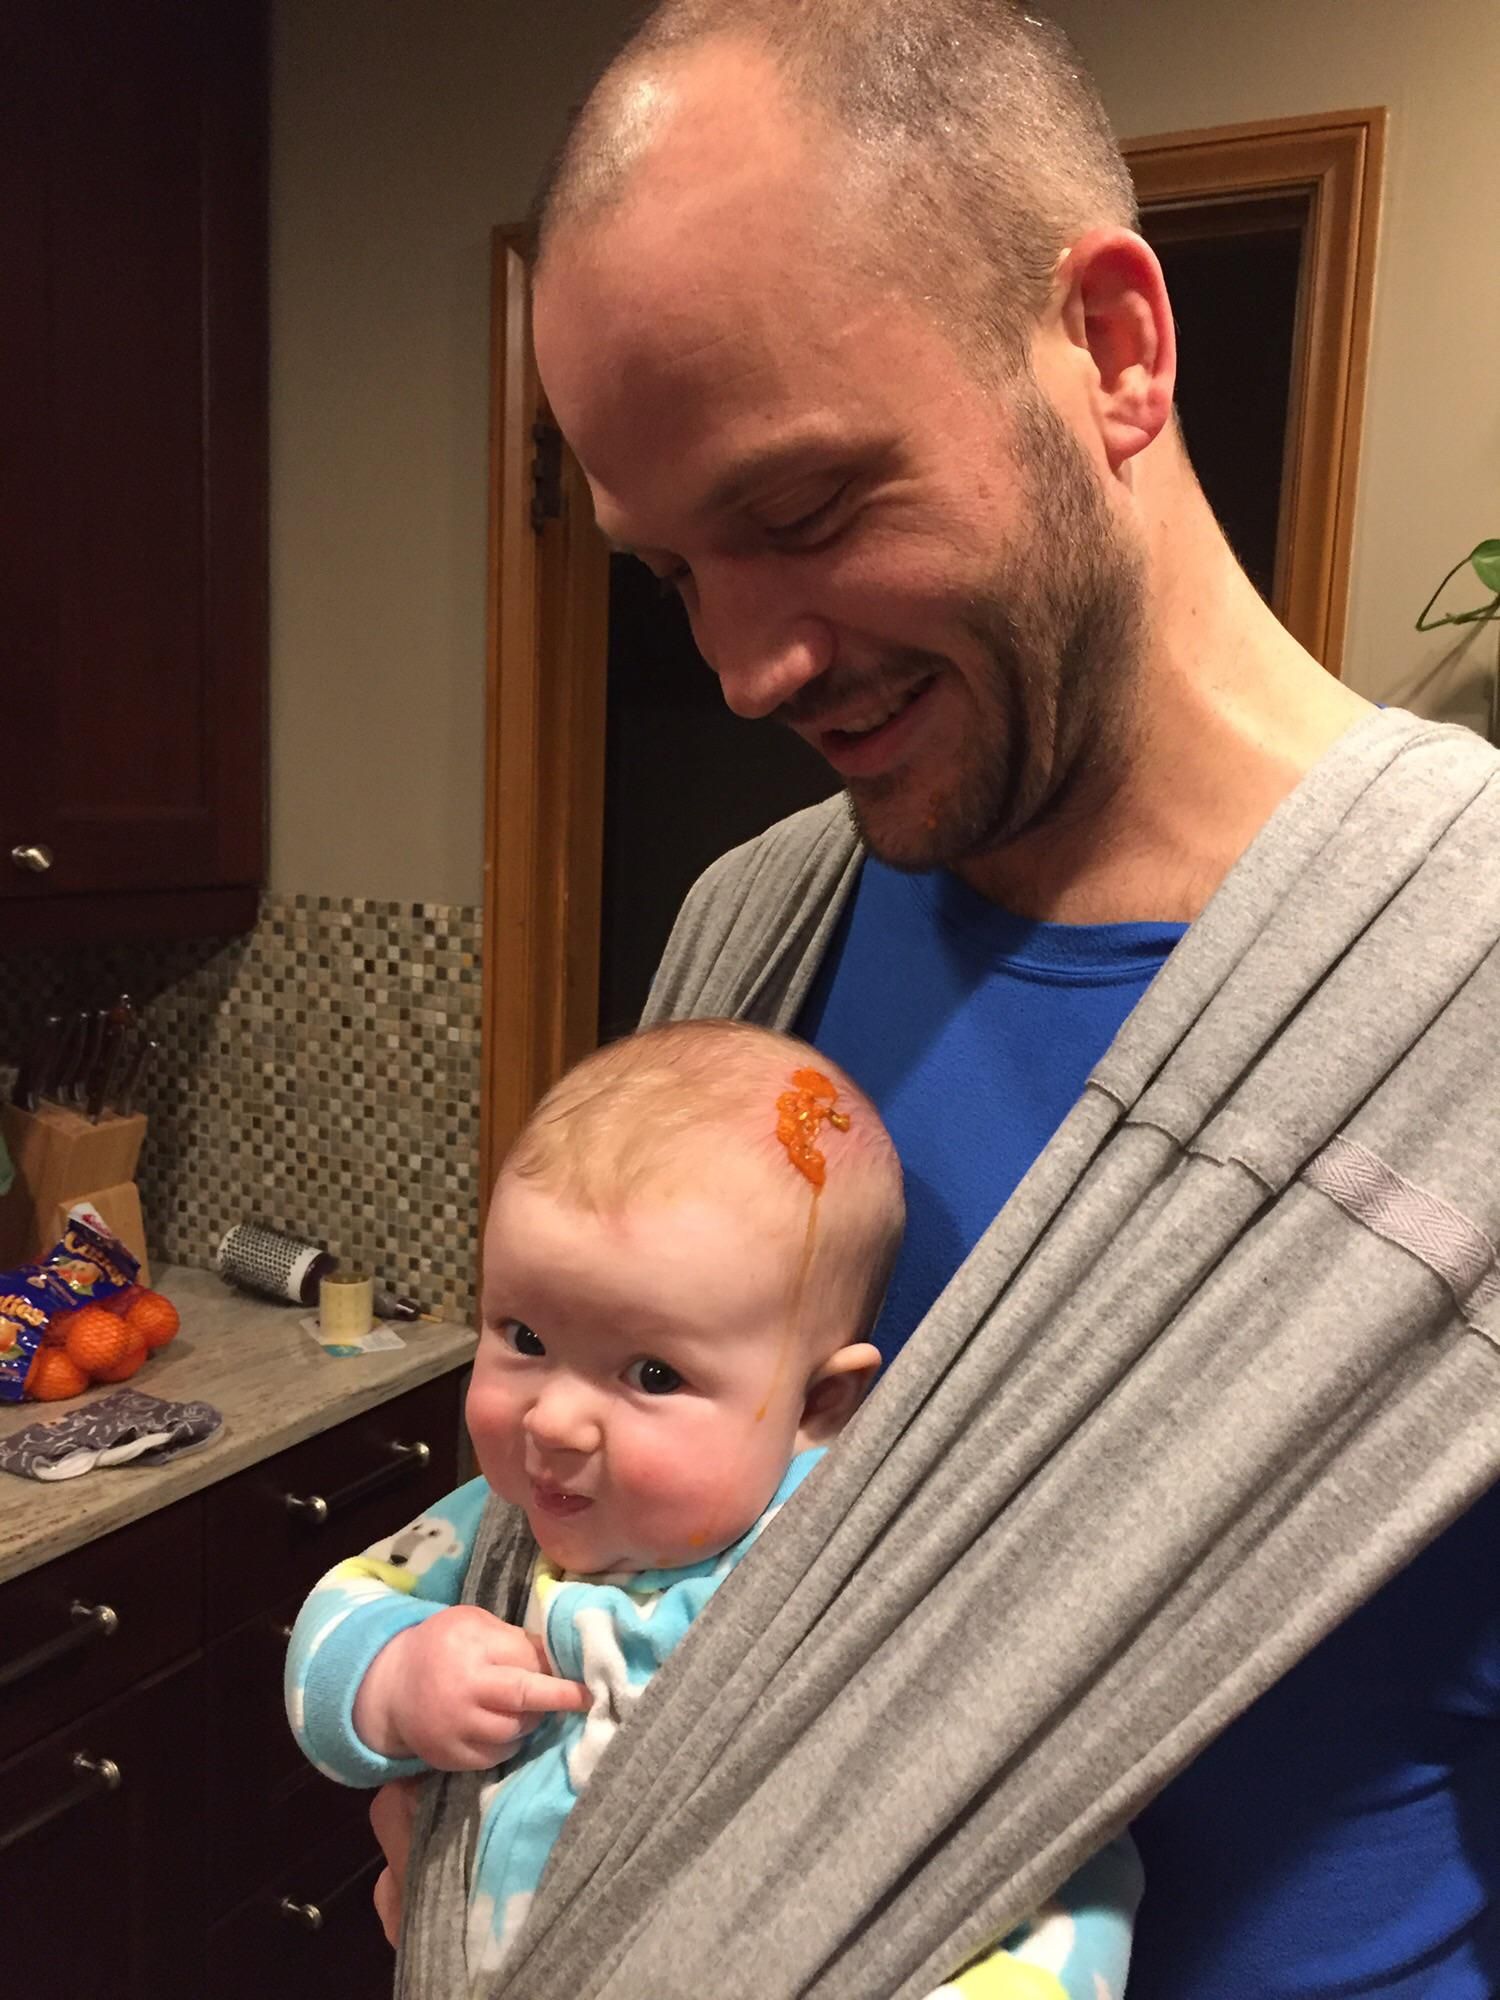 My daughter’s reaction when dad spilled some salsa on her head